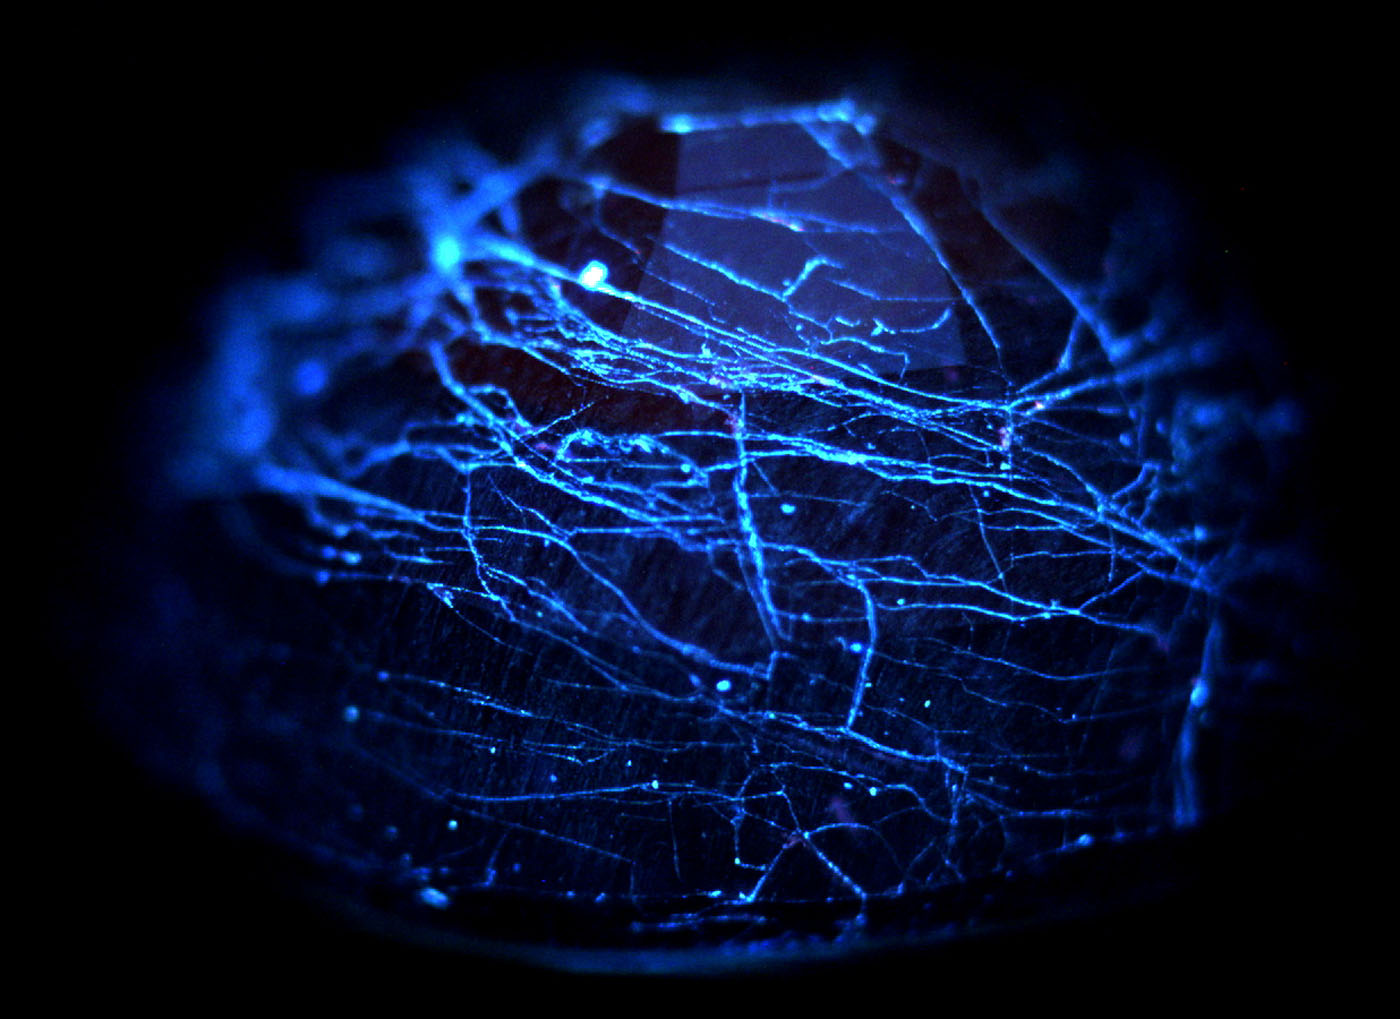 Figure 13. DiamondView™ image of a cobalt-doped glass-filled sapphire, showing chalky blue fluorescence from the glass-filled fissures. (Image: GIT).